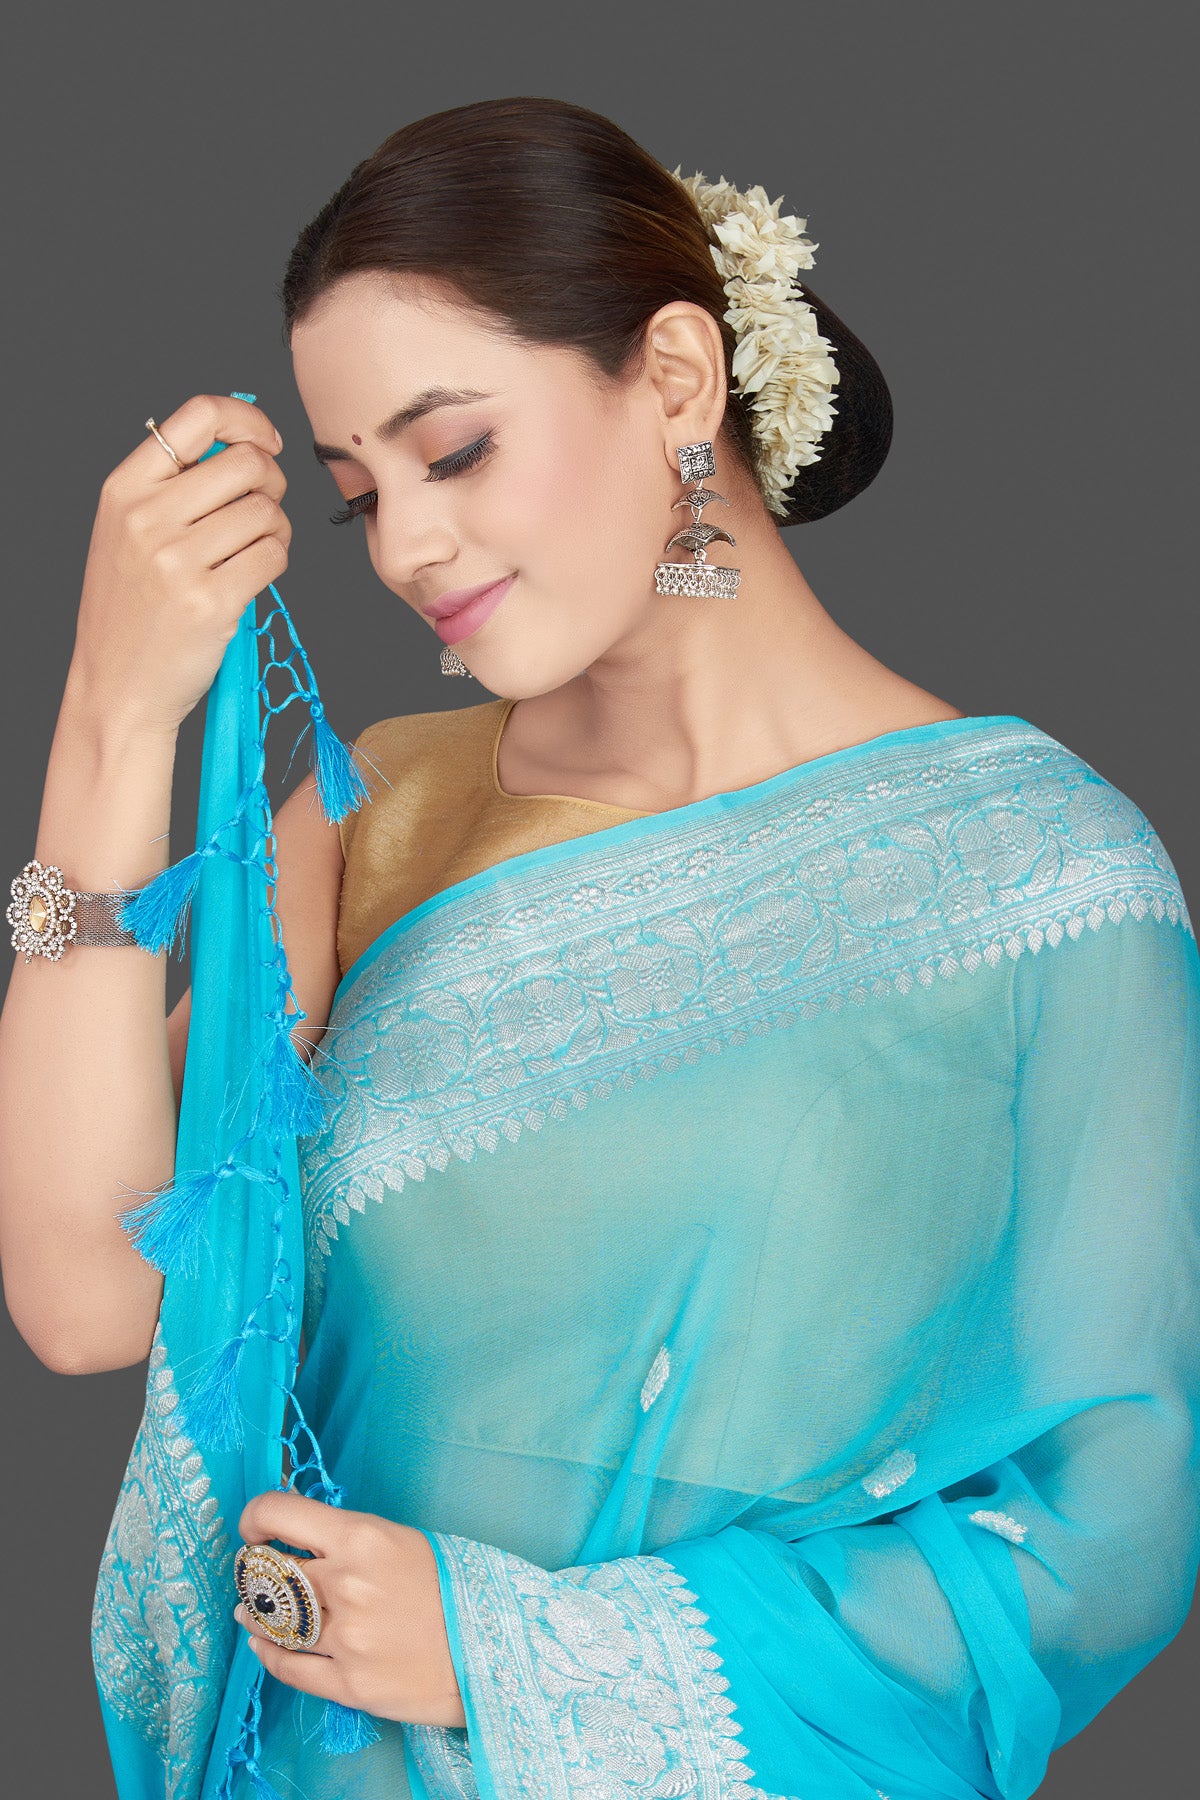 Buy beautiful sky blue chiffon georgette sari online in USA with silver zari border. Go for stunning Indian designer sarees, georgette sarees, handwoven saris, embroidered sarees for festive occasions and weddings from Pure Elegance Indian clothing store in USA.-closeup